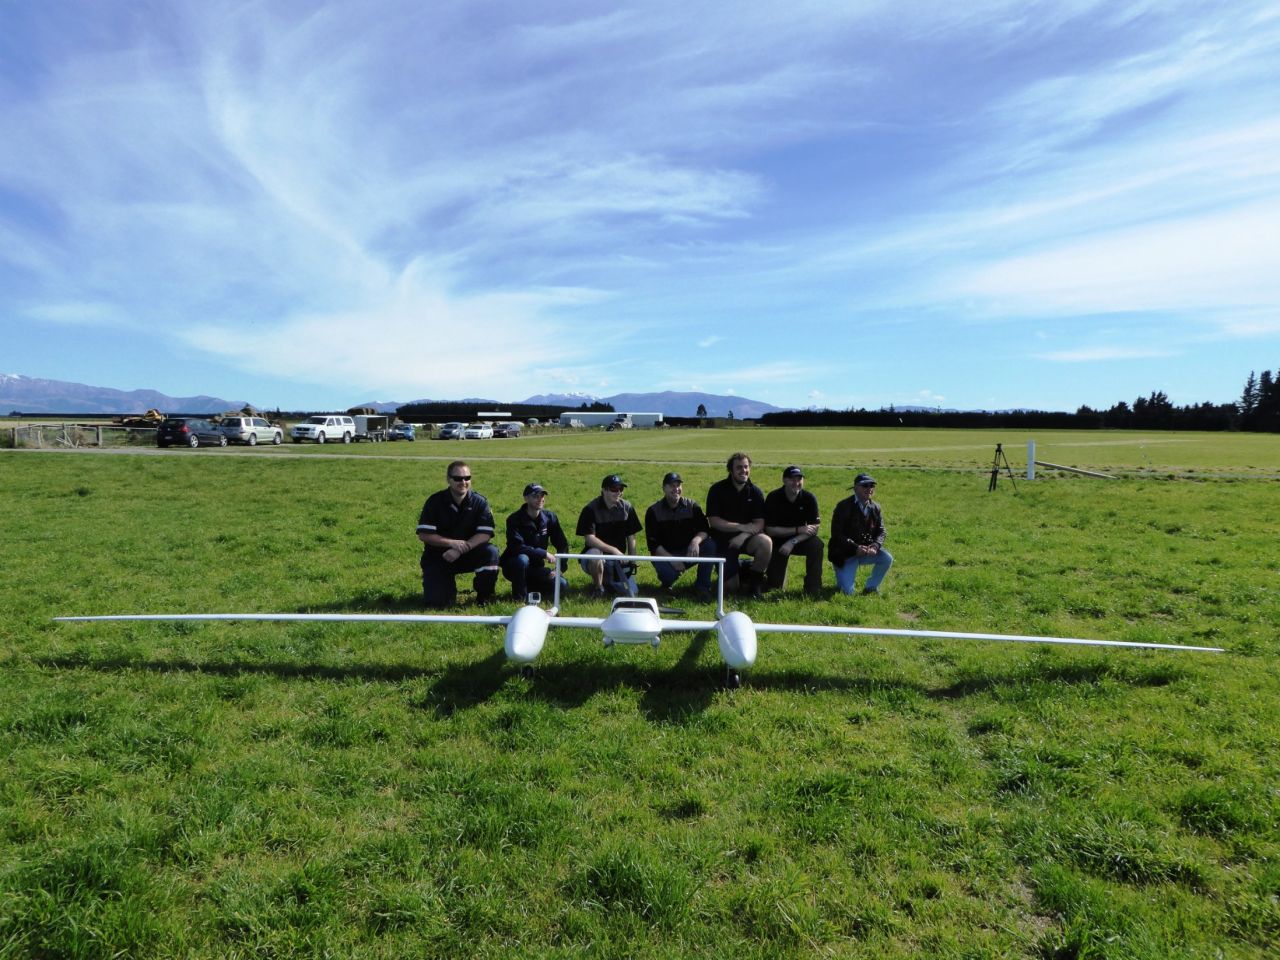 Coastguard New Zealand designed a drone to detect and aid people adrift at sea. Operating independently for long periods of time, the drone flies in search patterns in advance of coastguard vehicles, identifying victims, dropping life vests and rafts whilst relaying their position to emergency services.